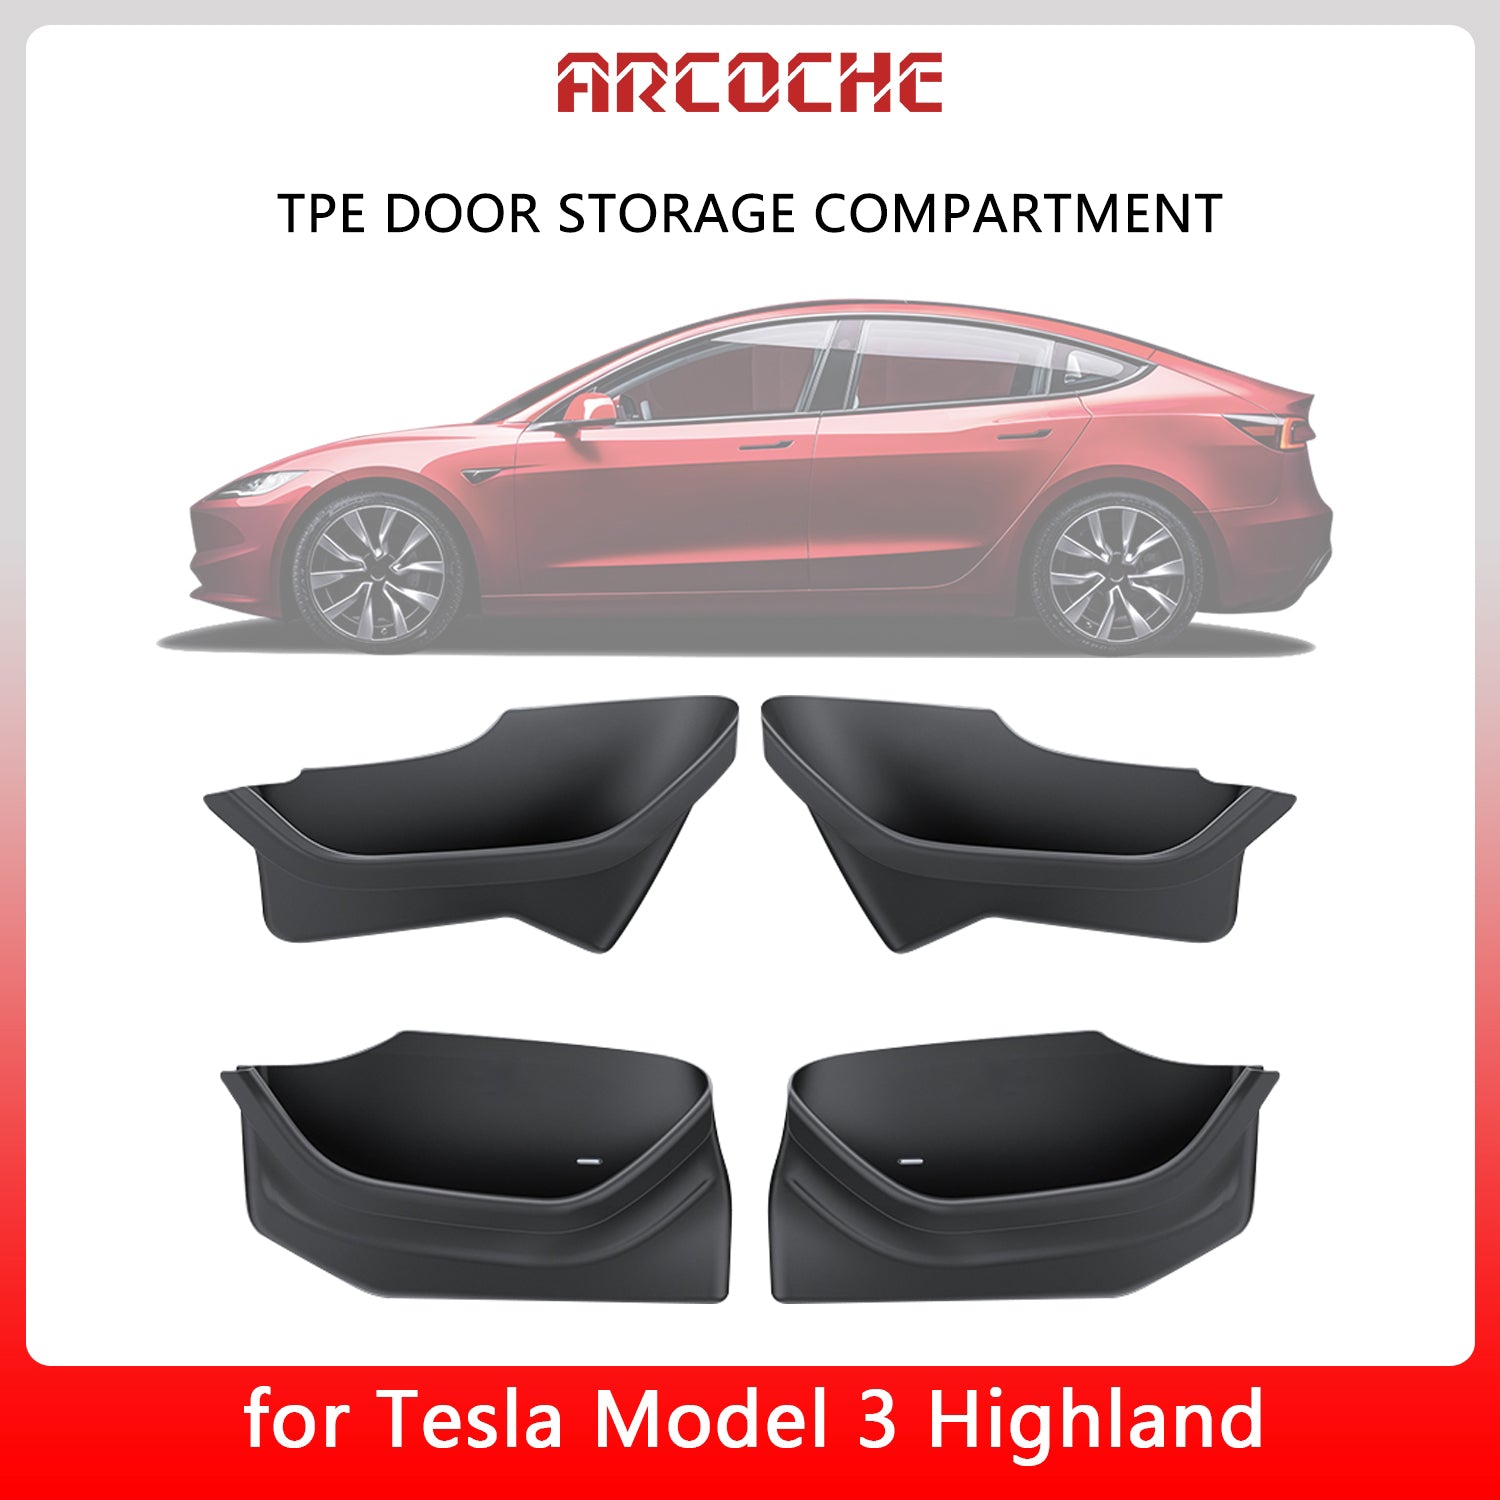 New Tesla Accessories Came in – Arcoche